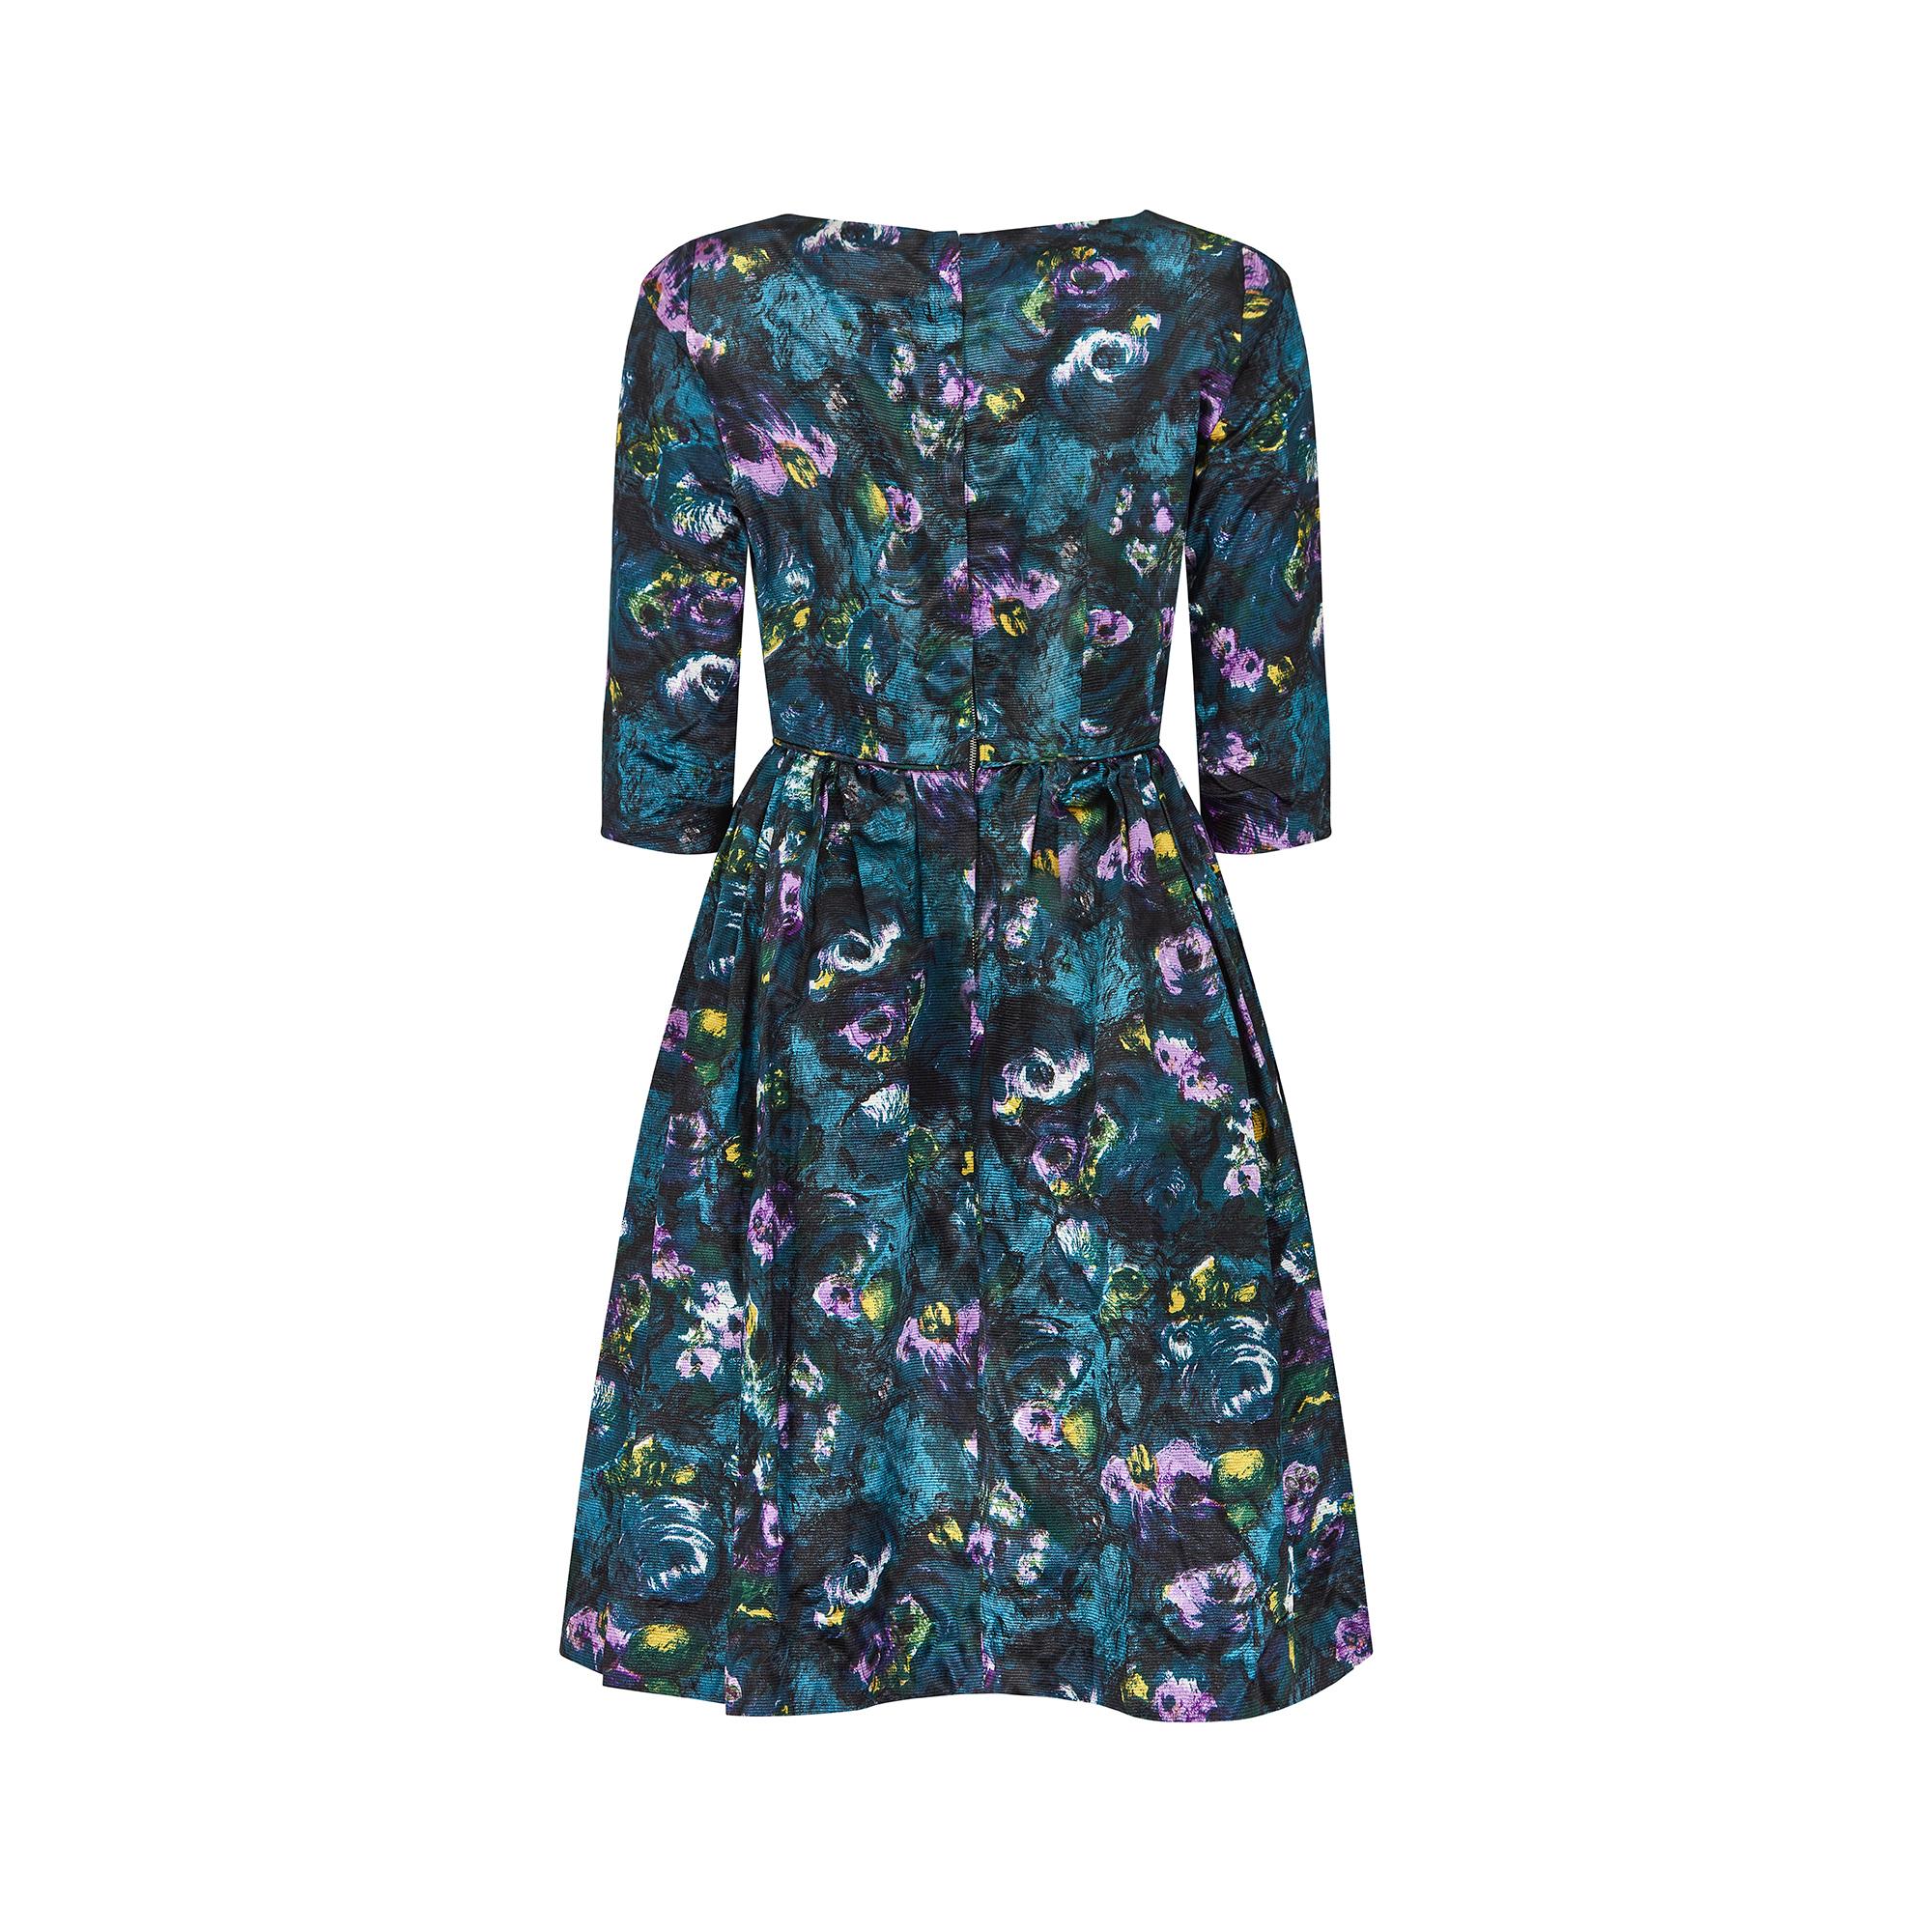 Women's 1960s Teal Blue Floral Three Quarter Sleeve Dress For Sale